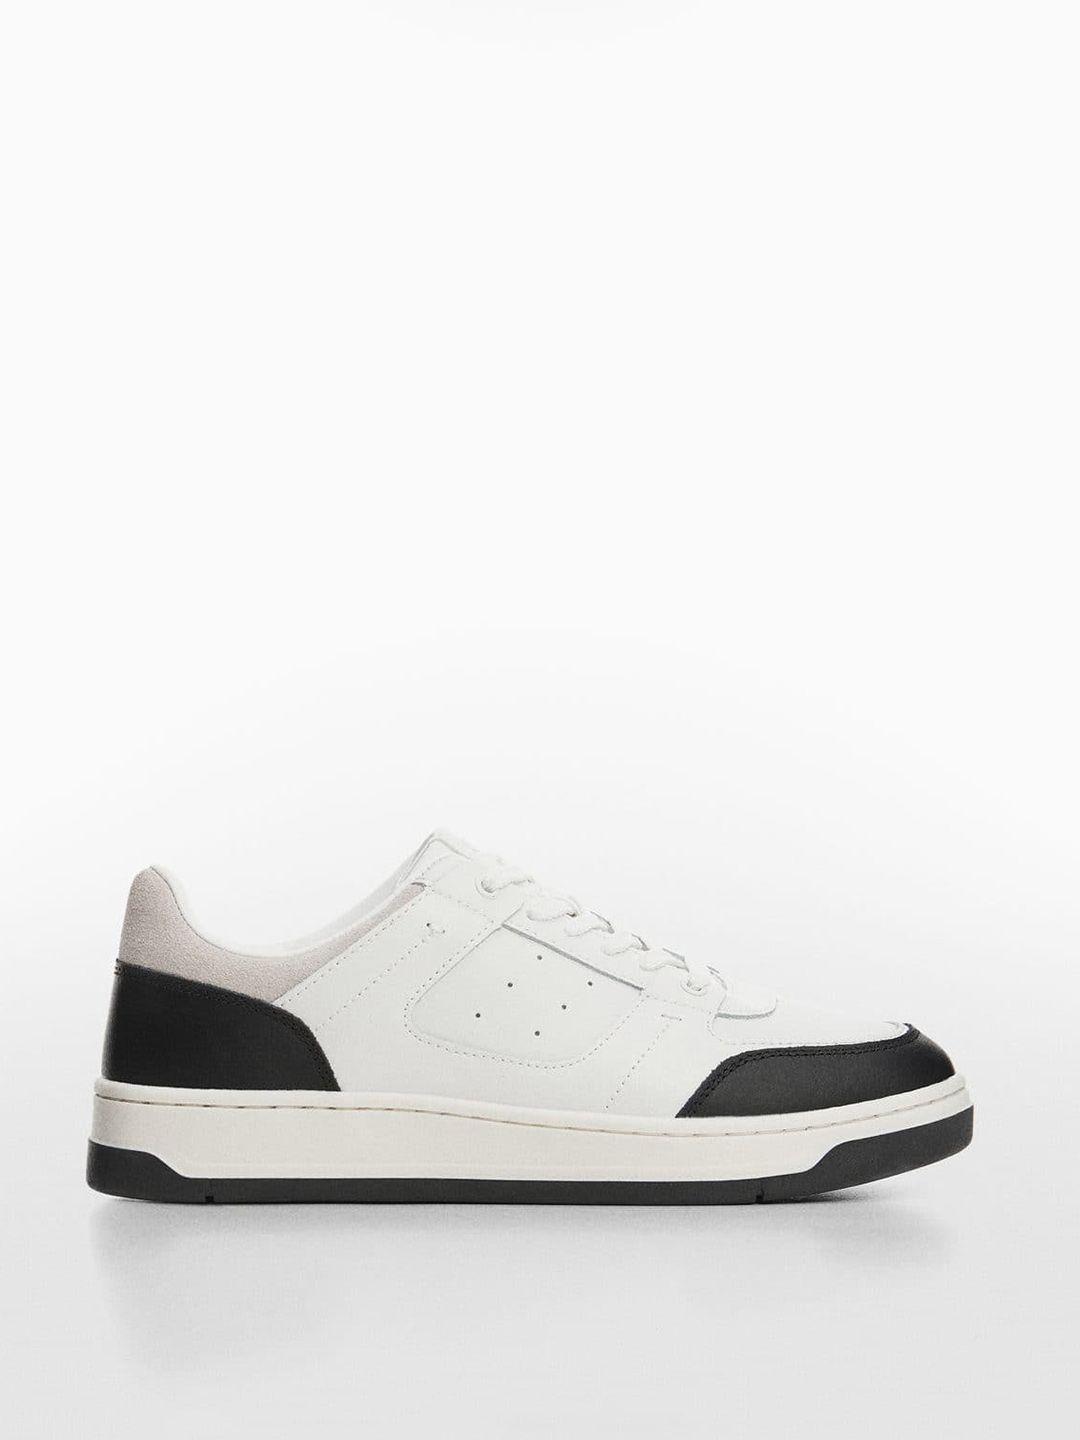 mango man colourblocked round-toe sneakers with perforated detail